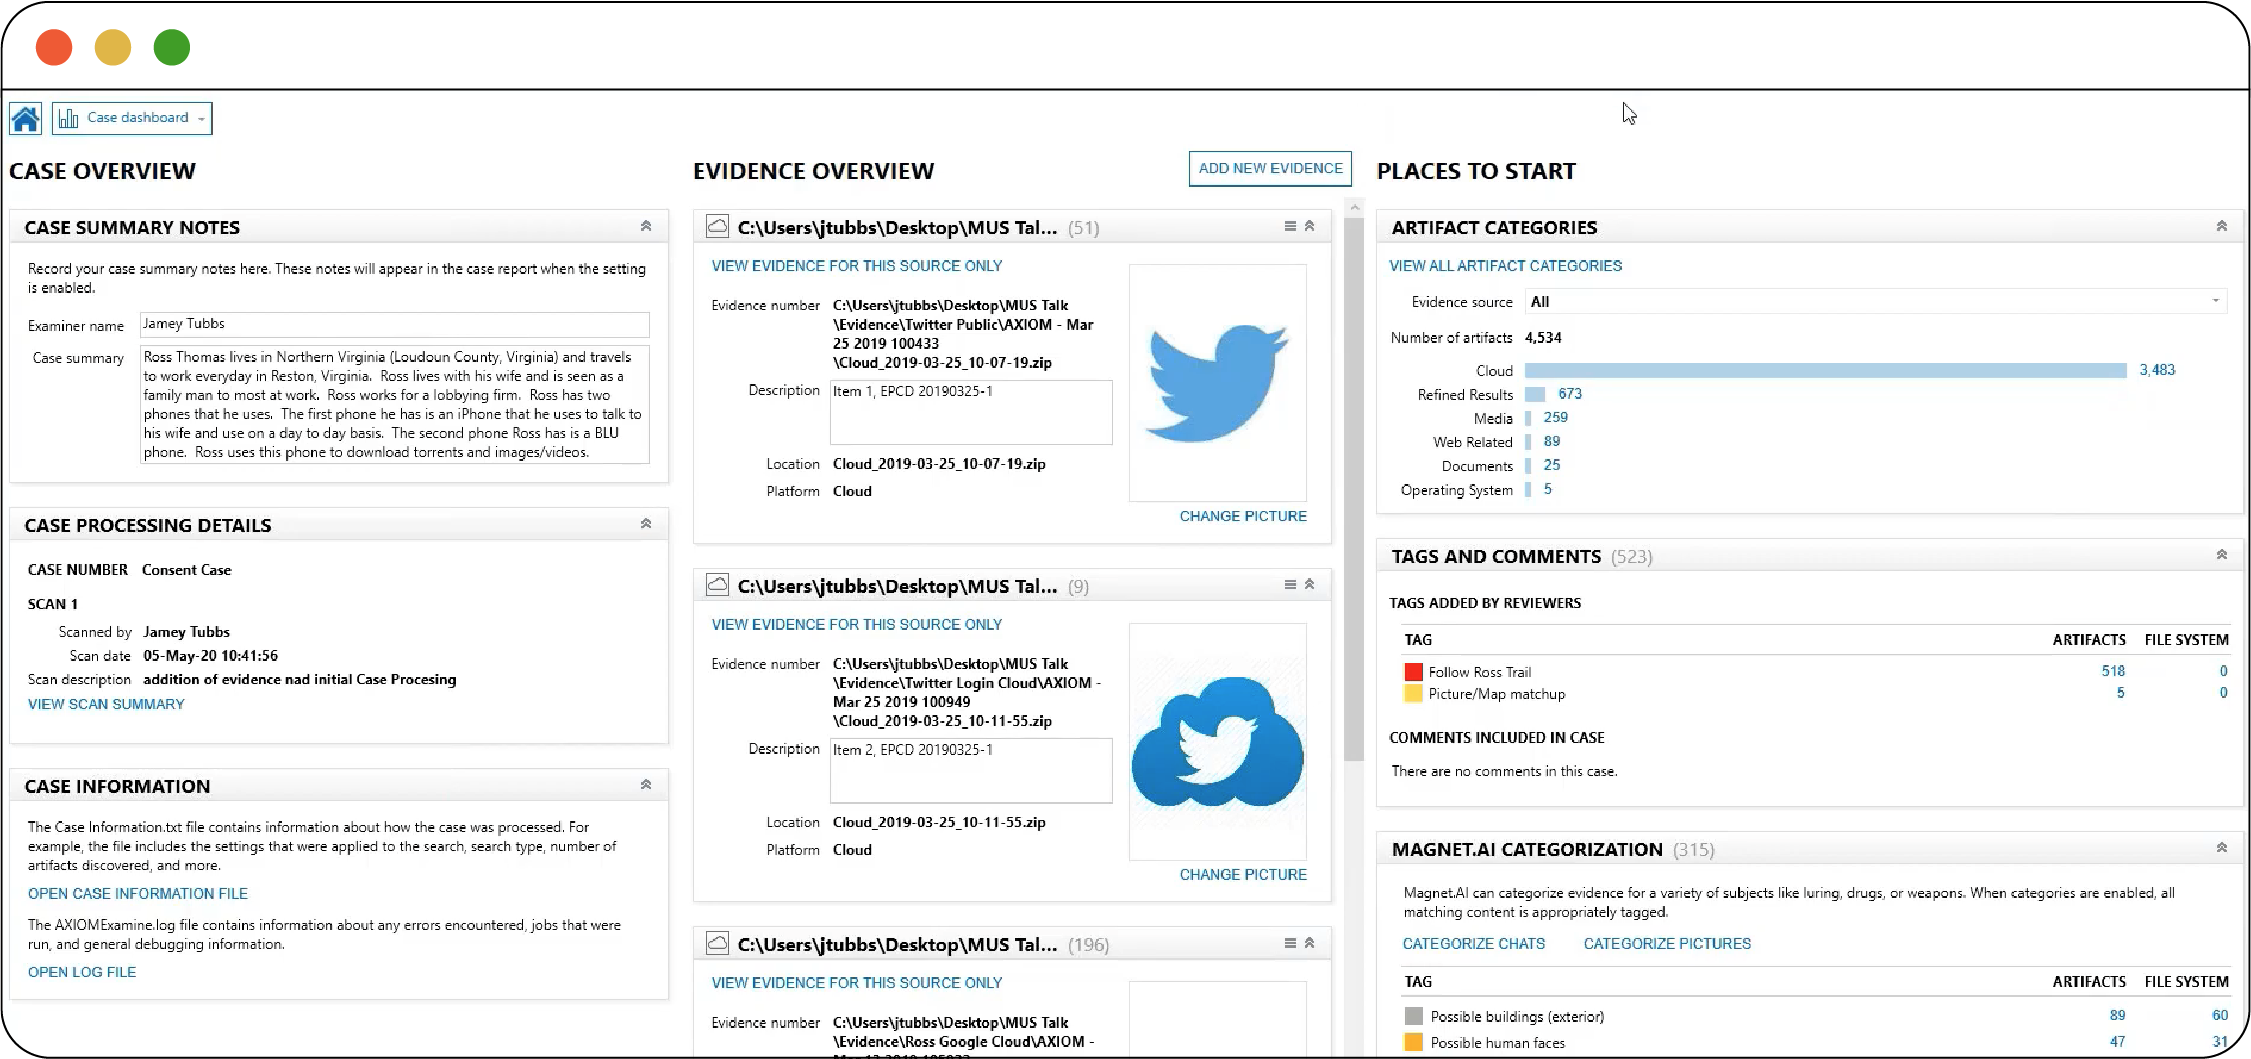 *__Figure 2.6__ shows the dashboard interface of Magnet AXIOM, showing access to Google and Twitter account data, along with other available data called “artifacts.” There are also options to search by image content (“Magnet.AI Categorization”) as well as “Keyword Matches” and “Passwords and Tokens.”*